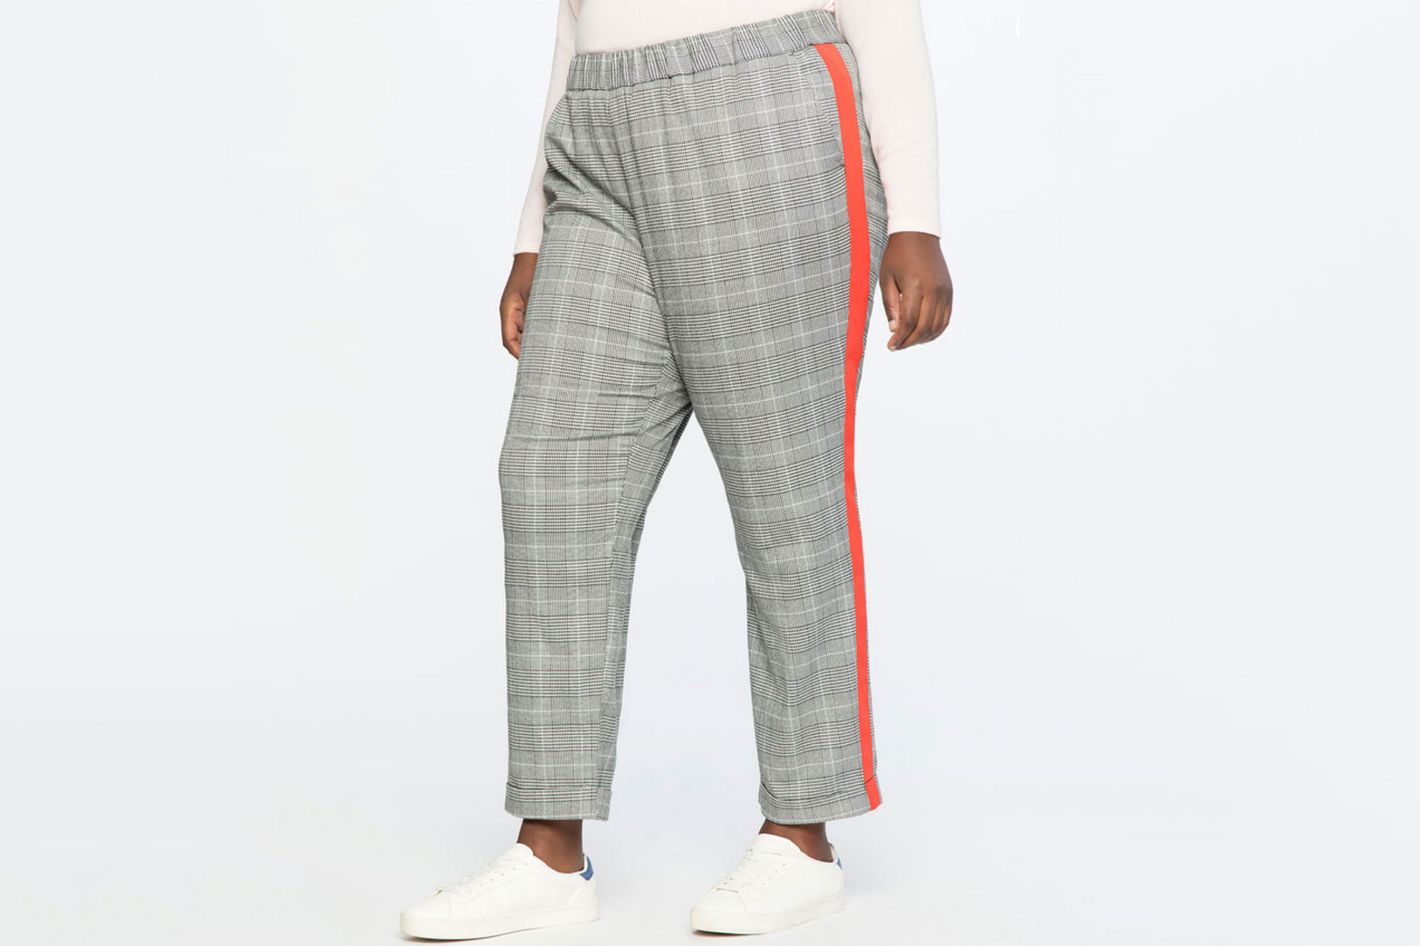 Stylish Stretchy Pants to Get You Through Thanksgiving